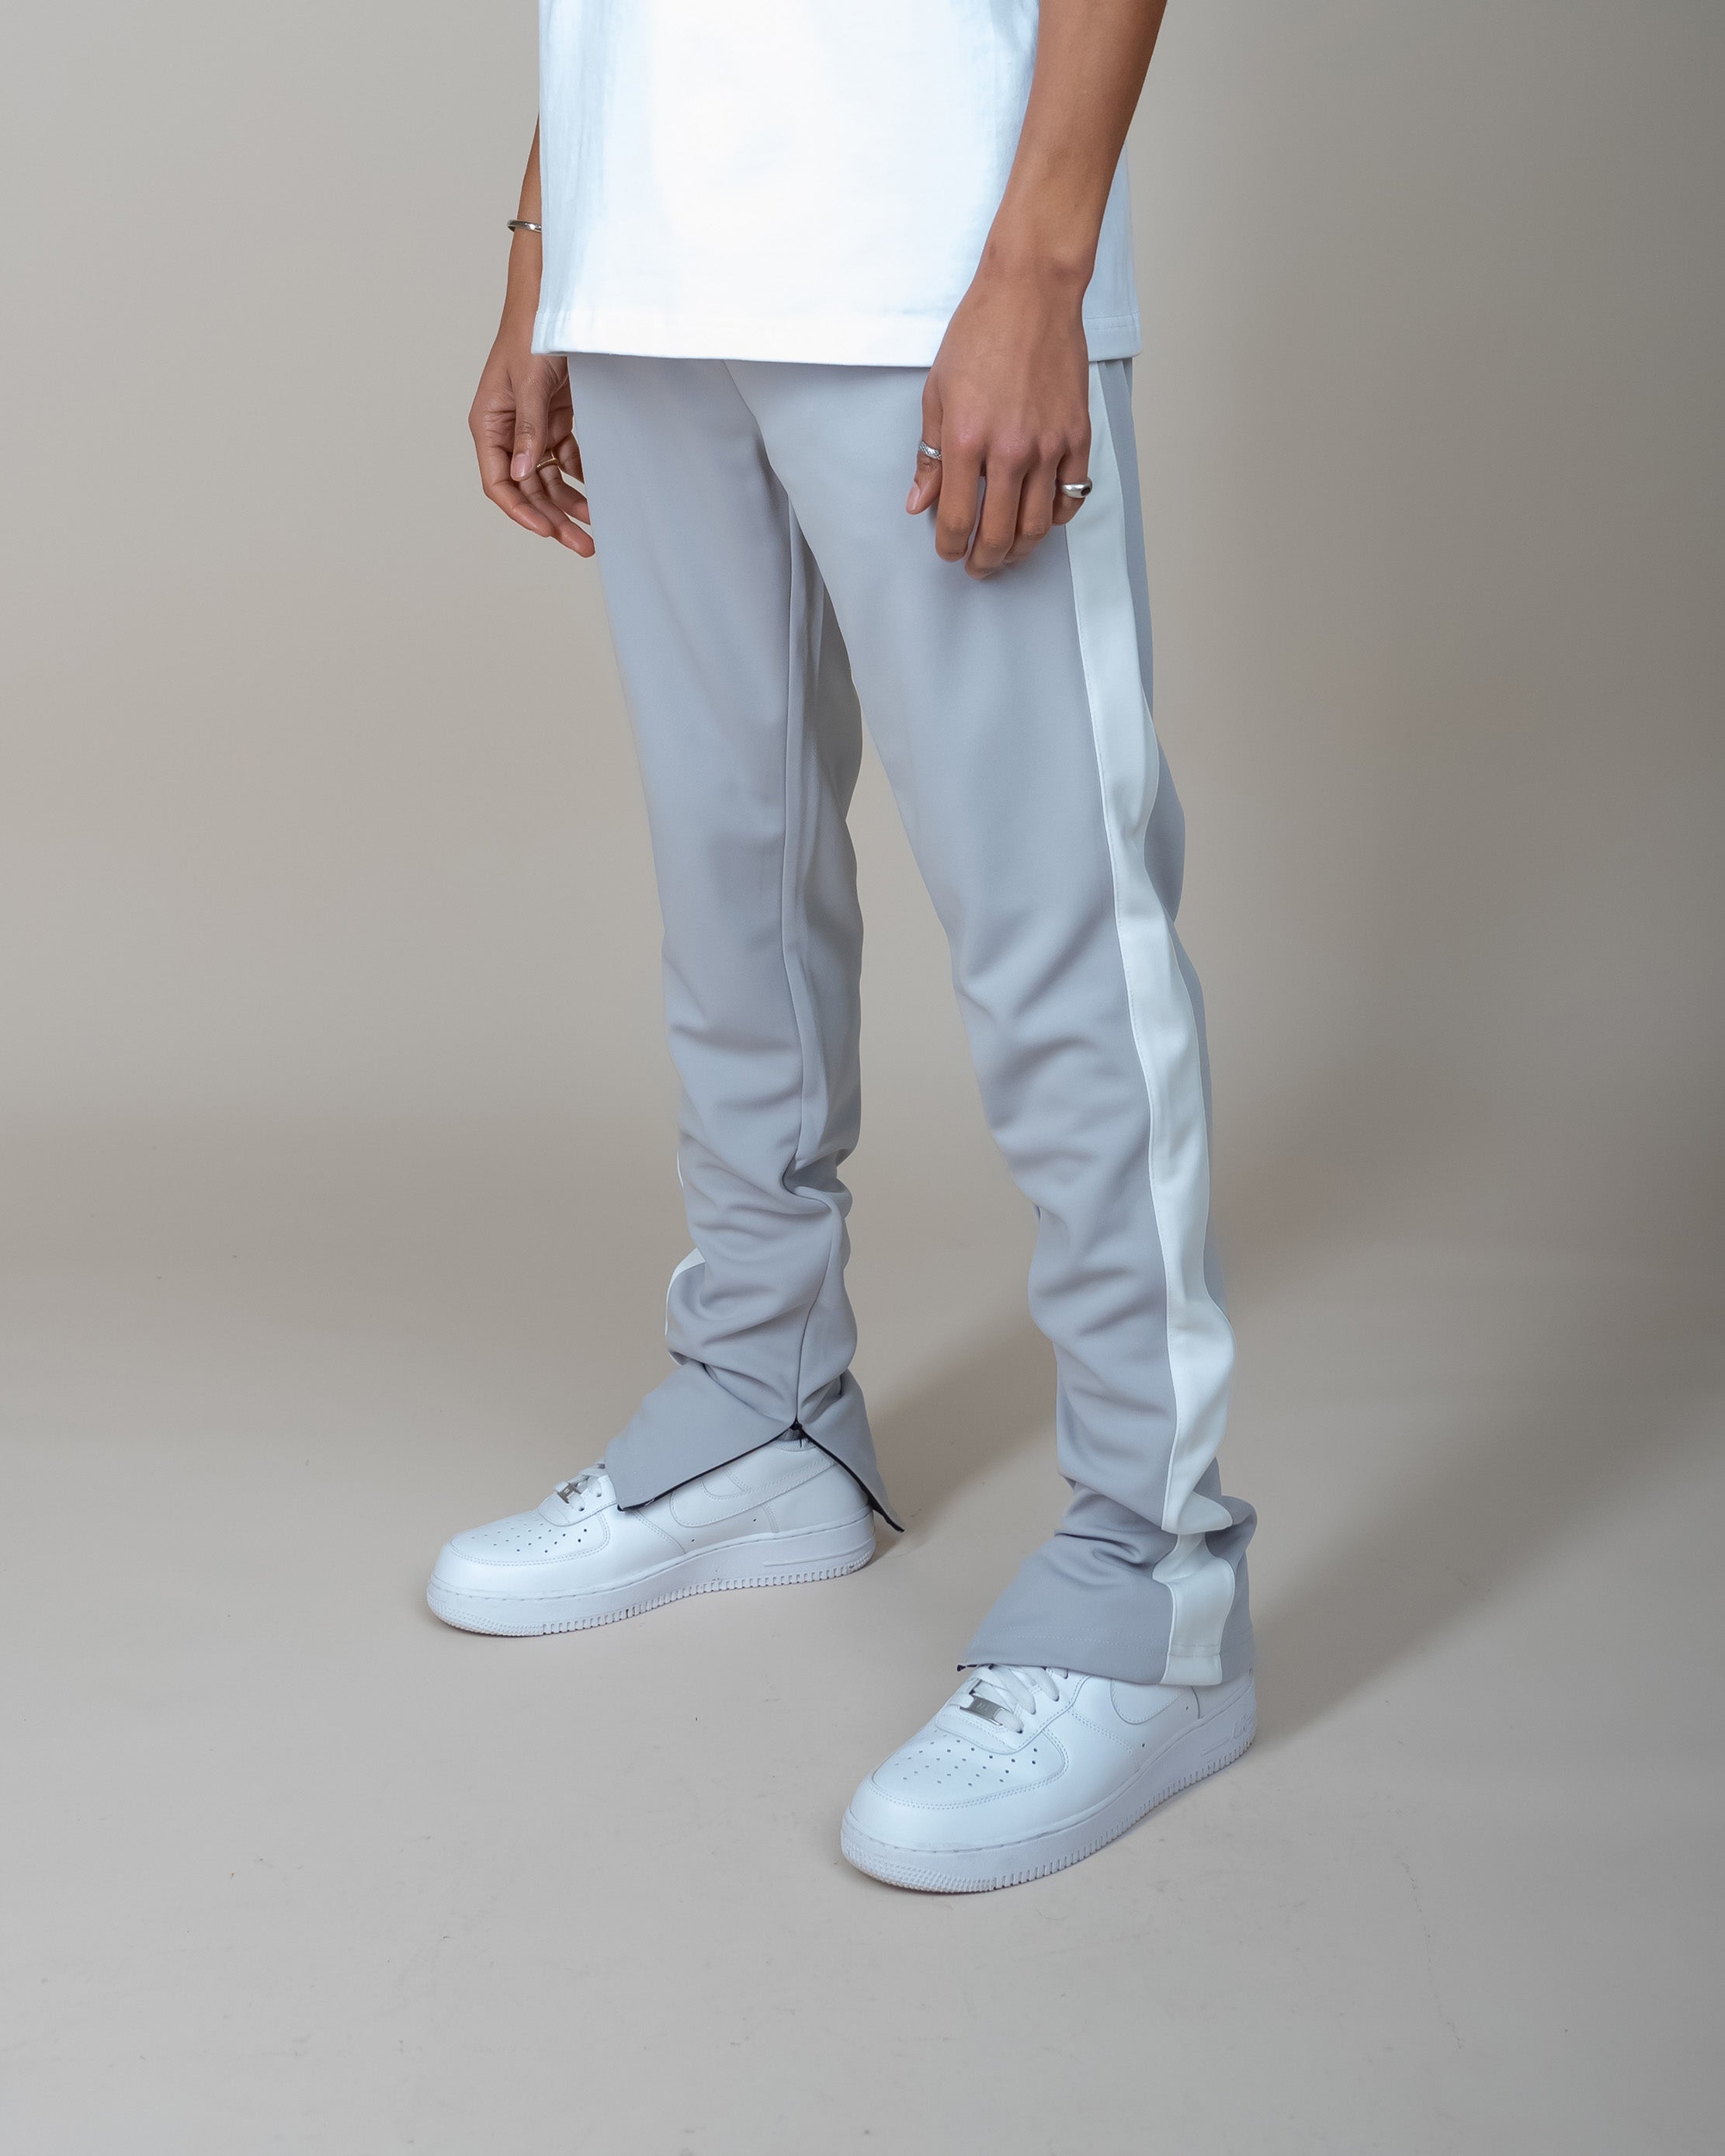 Buy High-Quality Black Polyester Track Pants For Men at Jeffa – JEFFA